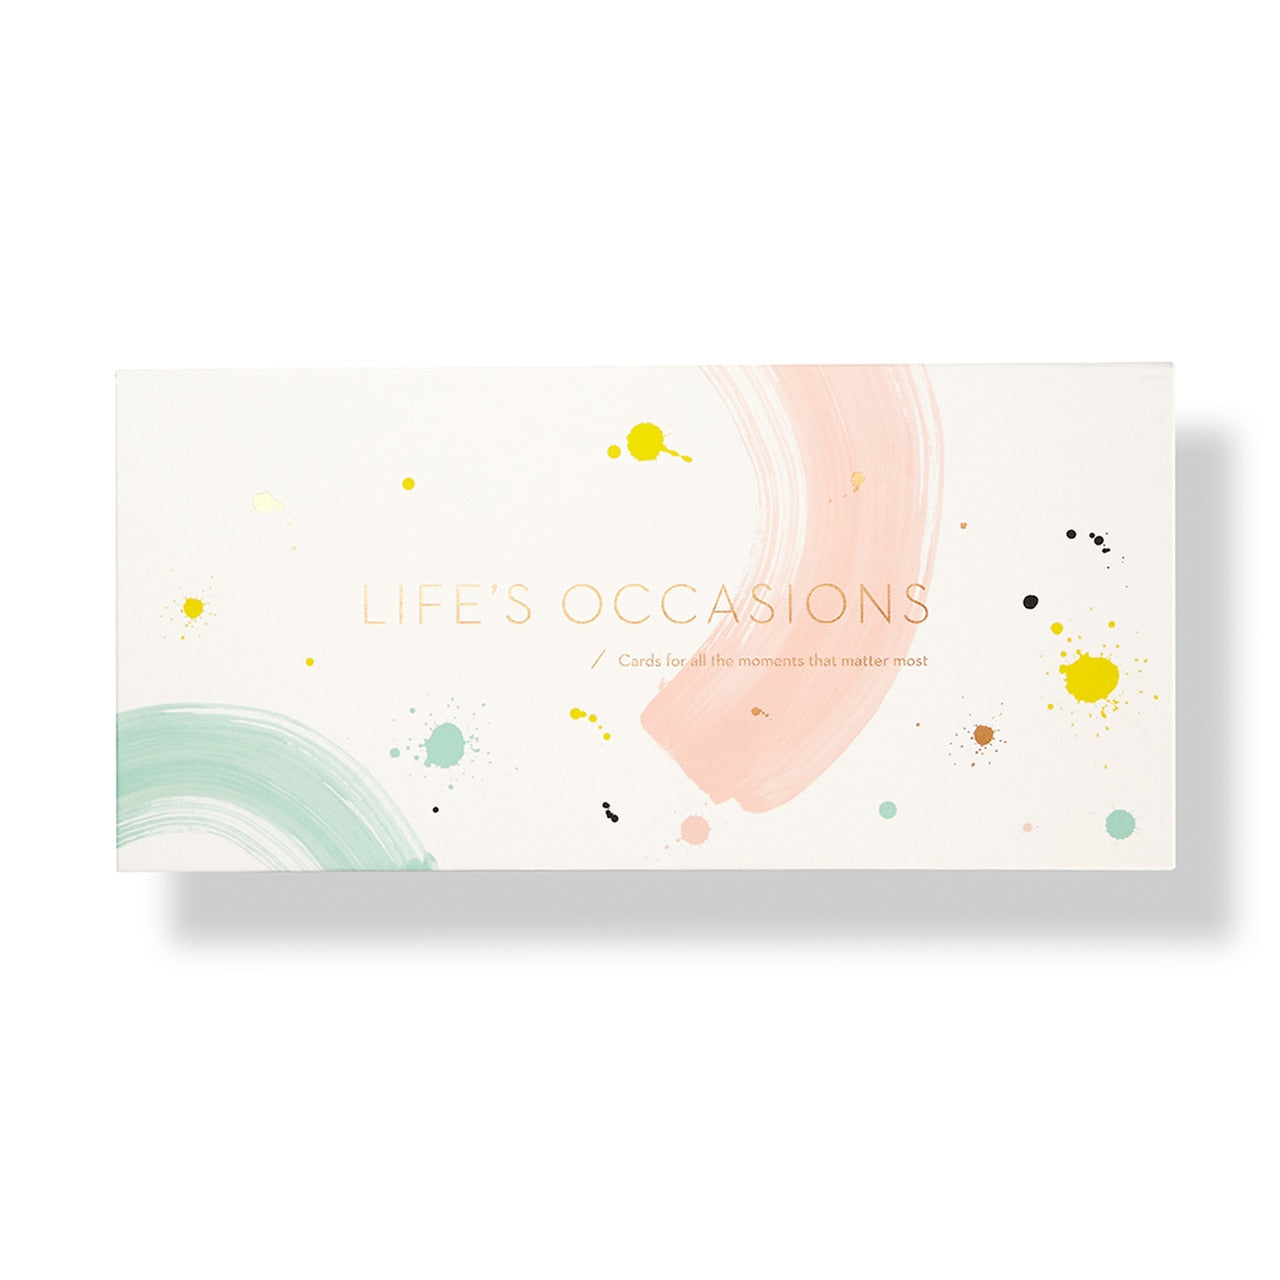 Life's Occasions Boxed Cards